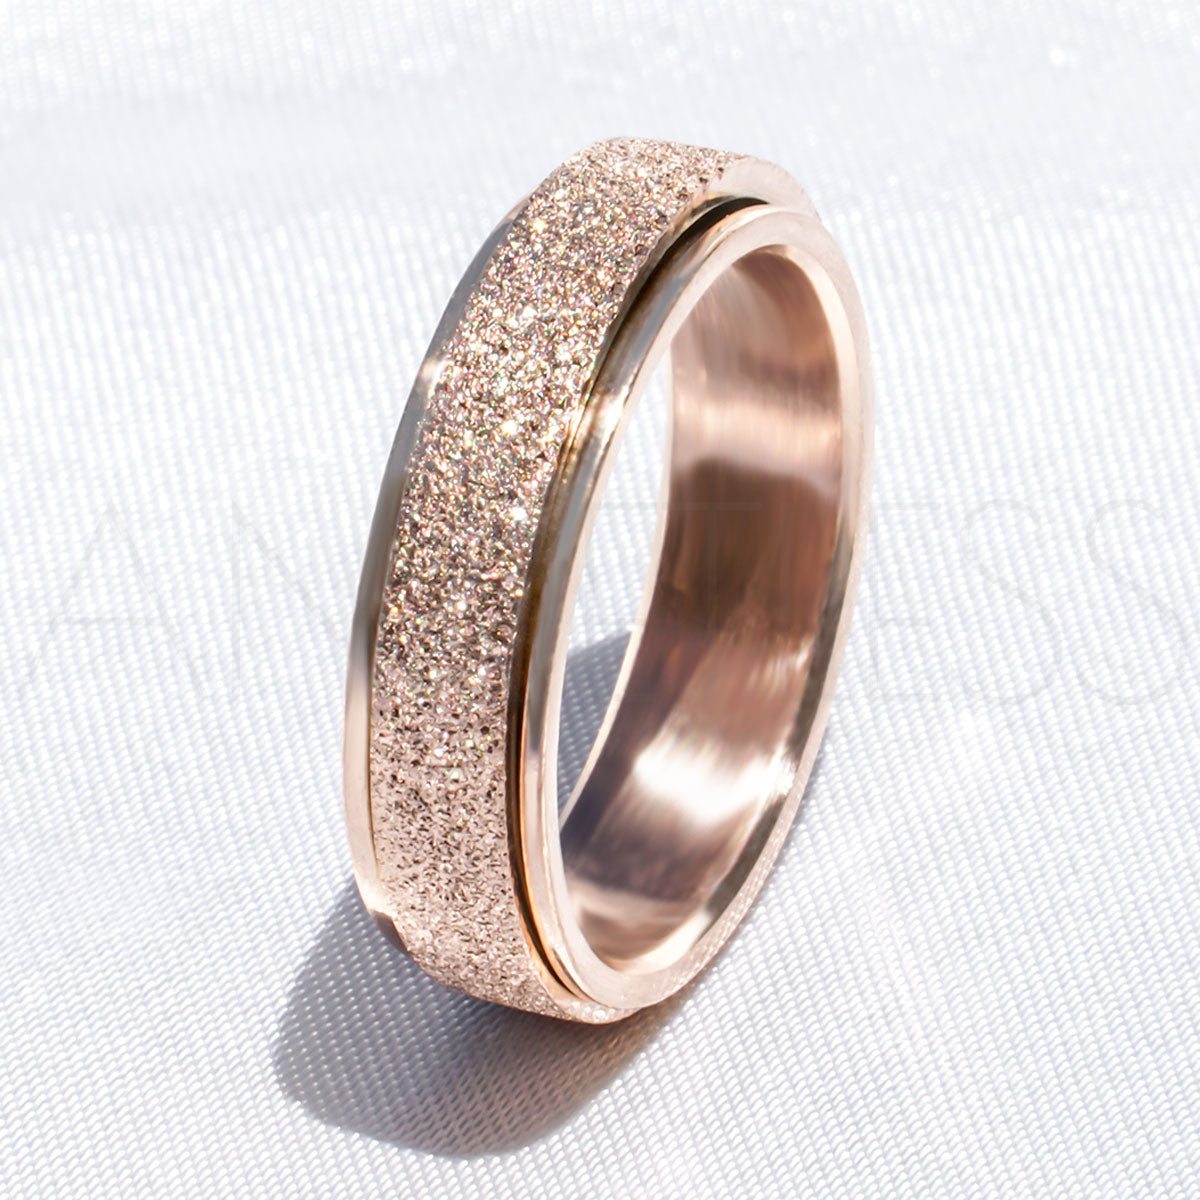 Sparkly Rose Gold Anxiety Ring on White Background